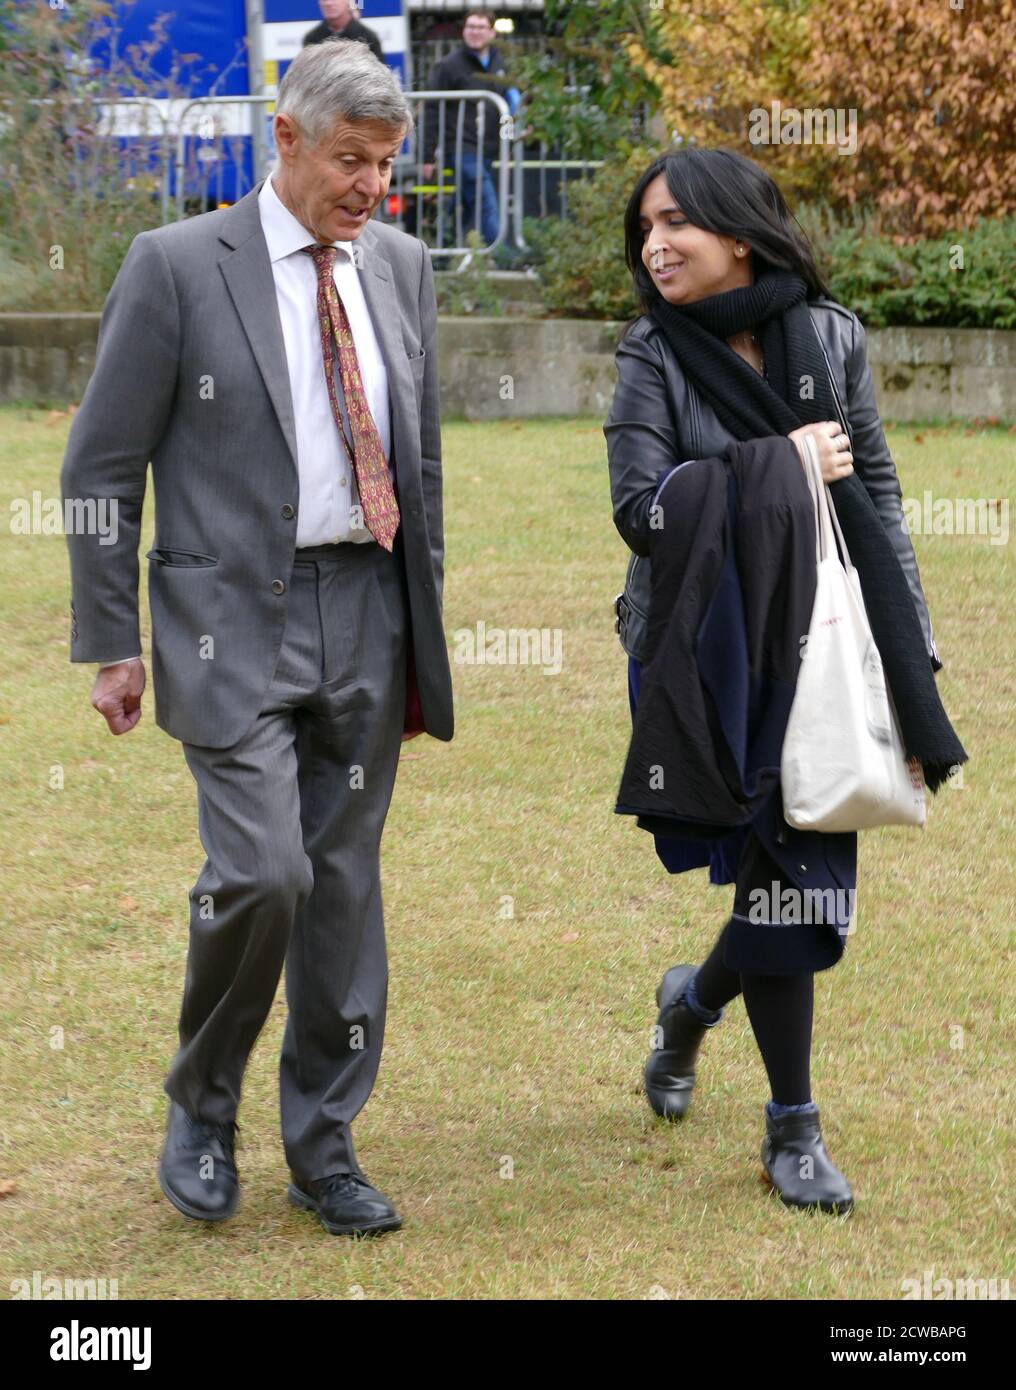 Matthew Parris and Dia Chakravarty arrive for media interviews after parliament returned to sit, after the prorogation was annulled by the Supreme Court. 25th September 2019. Dia Chakravarty (born 1984), Bangladeshi-born British political activist, former political director of the Taxpayers' Alliance, and Brexit Editor of The Daily Telegraph. Matthew Parris (born 1949); British political writer and broadcaster, formerly a Conservative Member of Parliament. Stock Photo